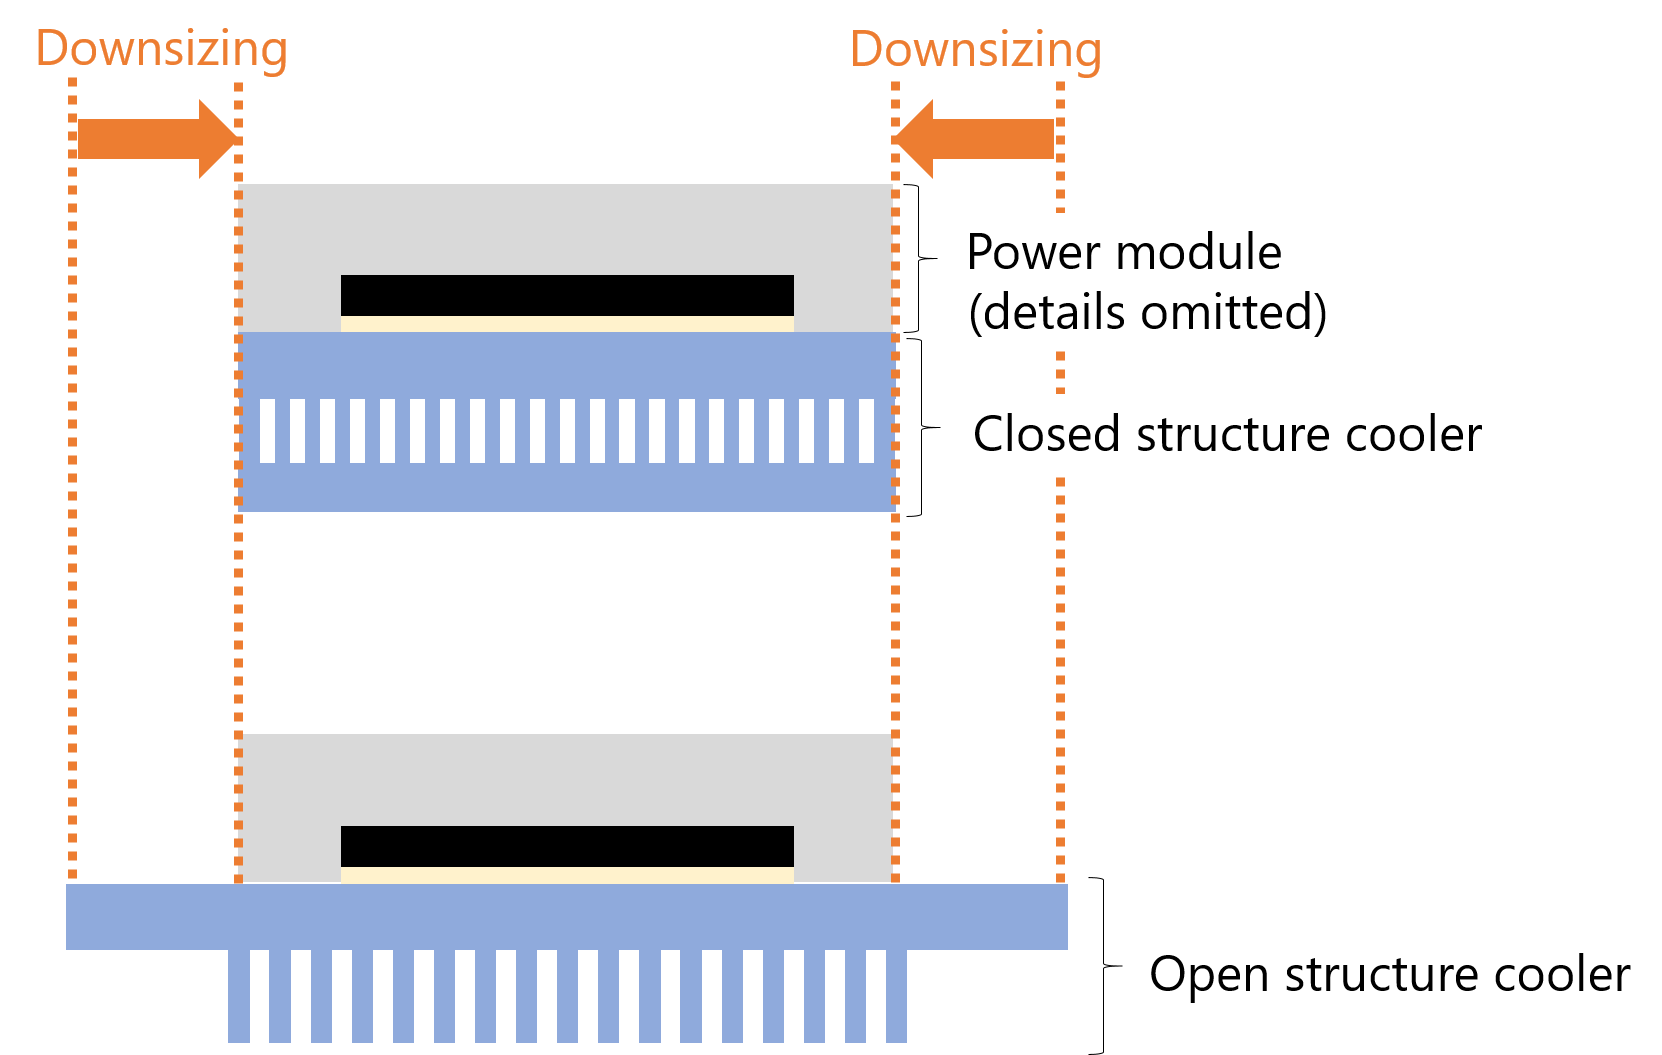 Diagram of Downsizing by a closed cooler structure